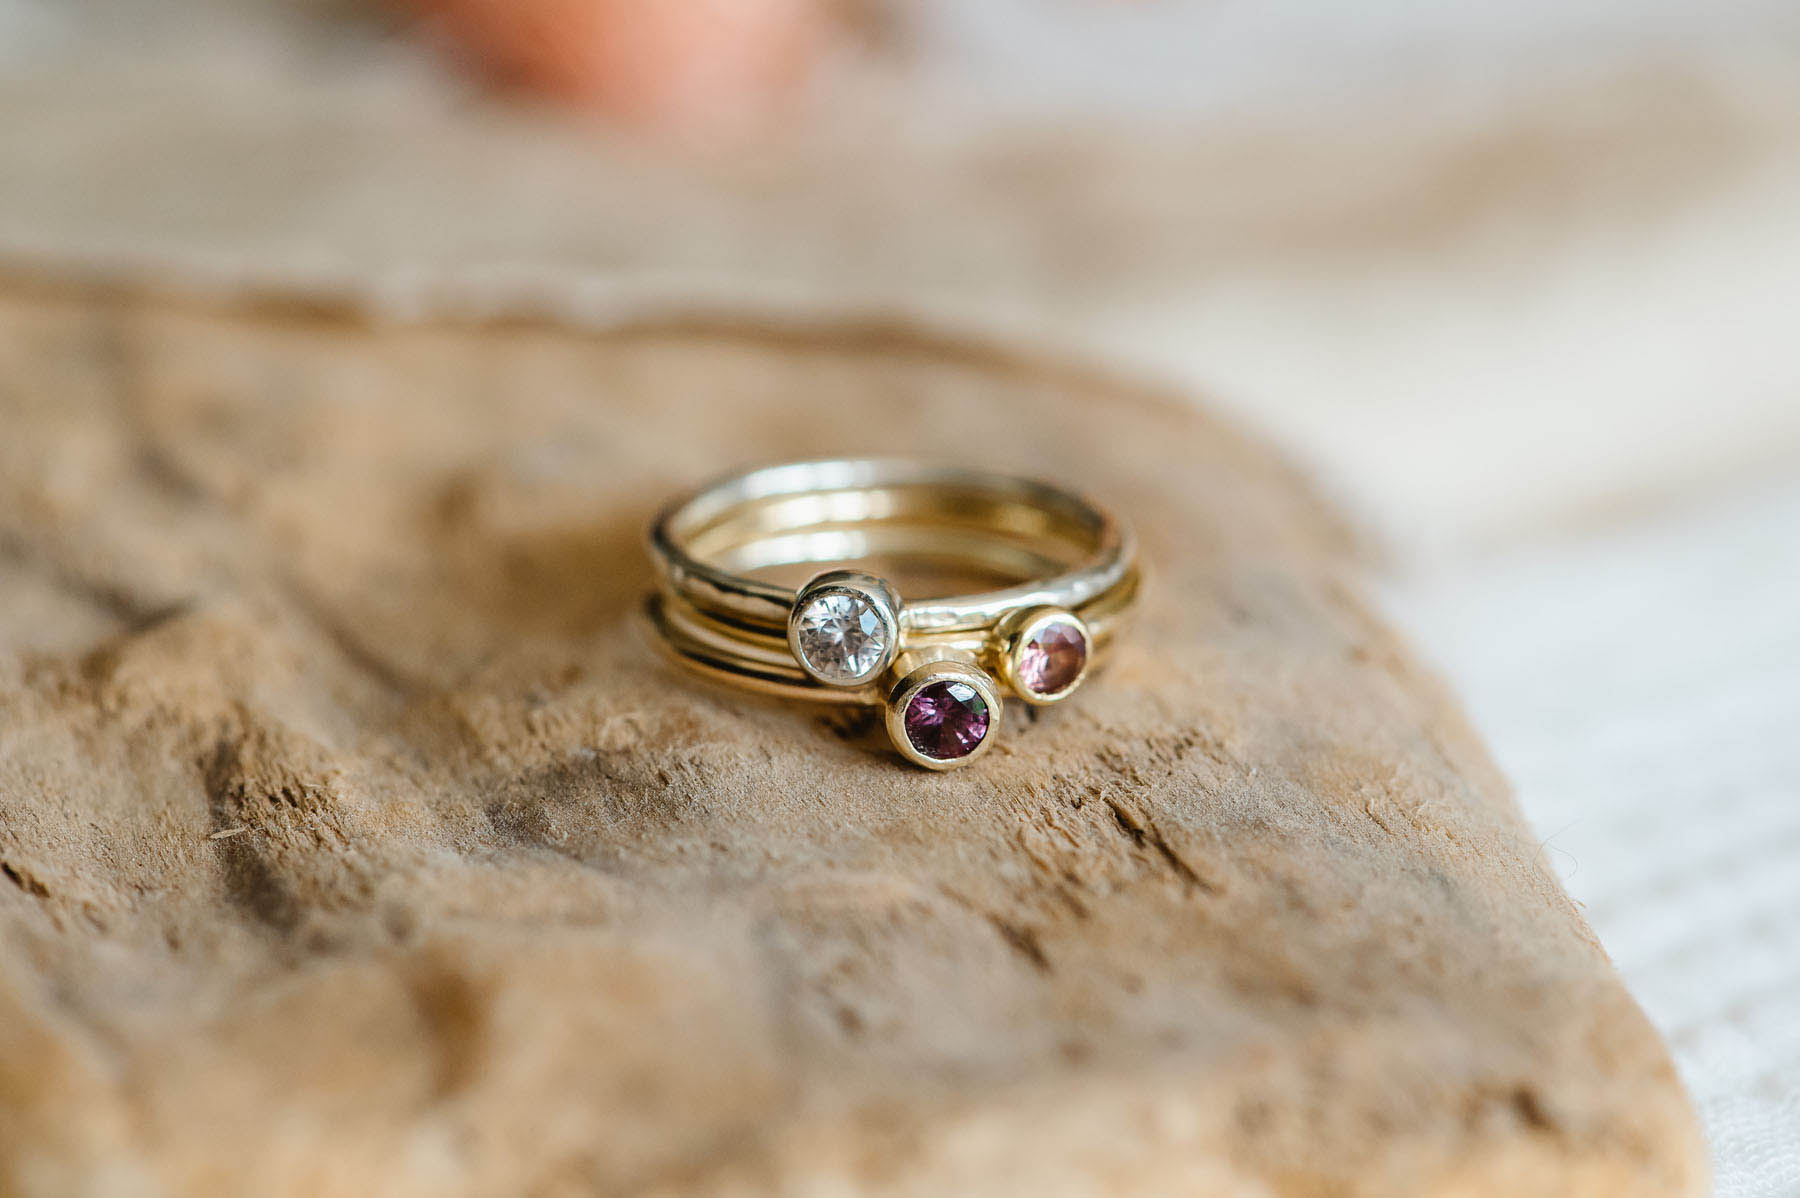 Recycled gold natural gemstone rings by Nikki Stark